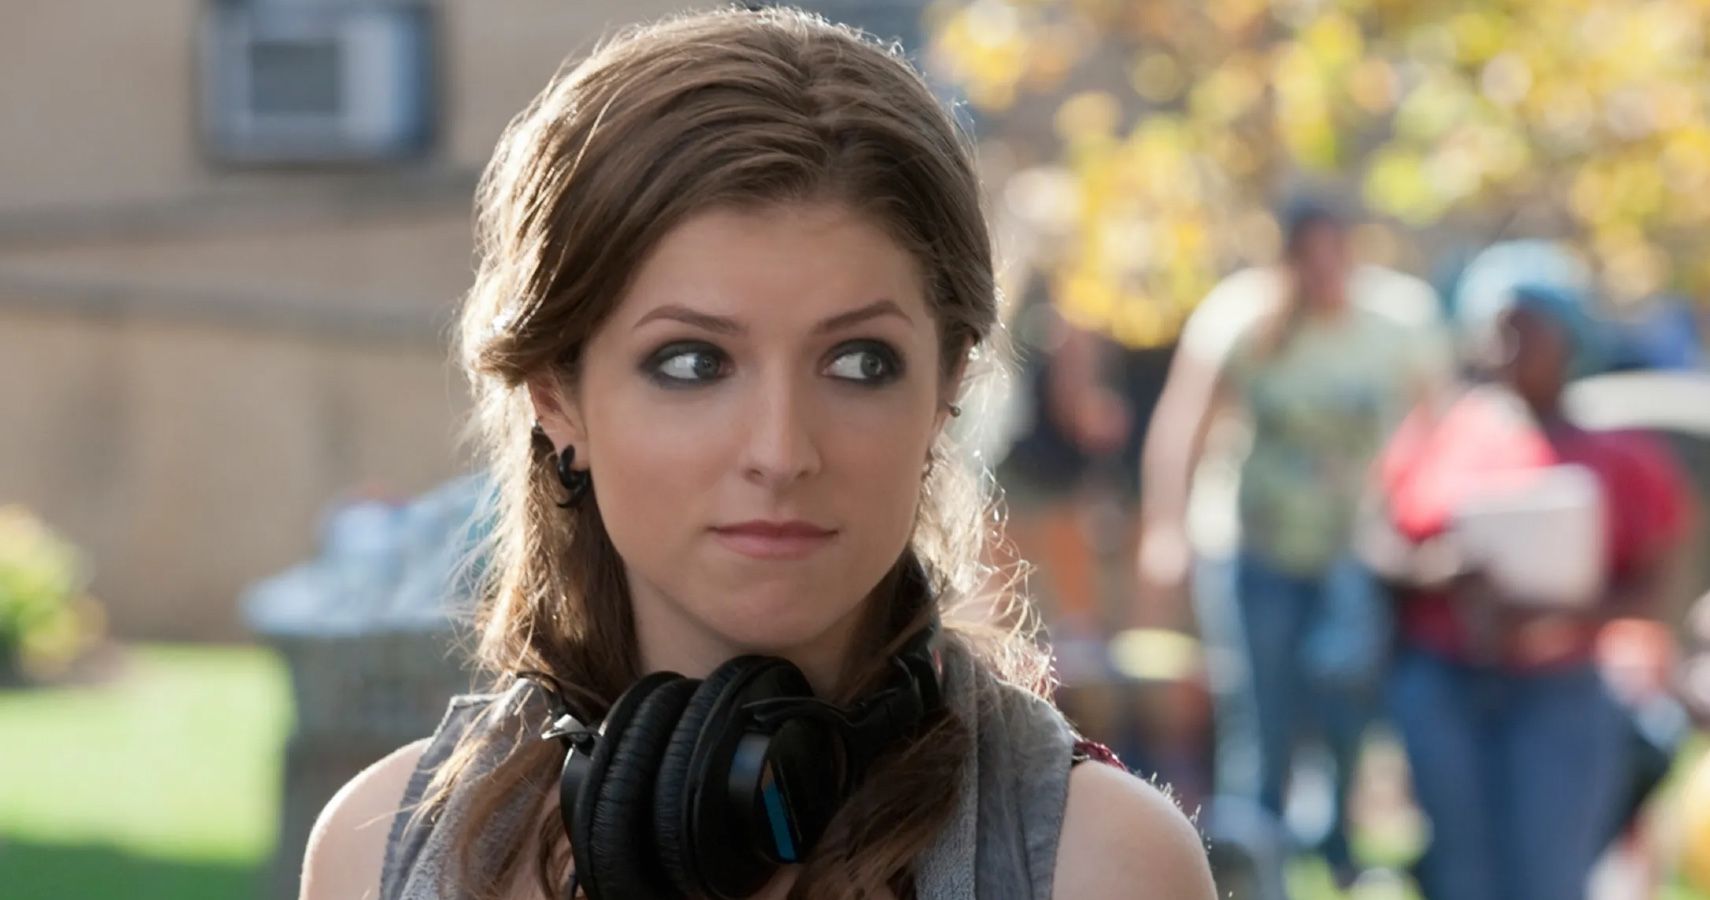 Anna Kendrick Songs: Photos, videos and related news.